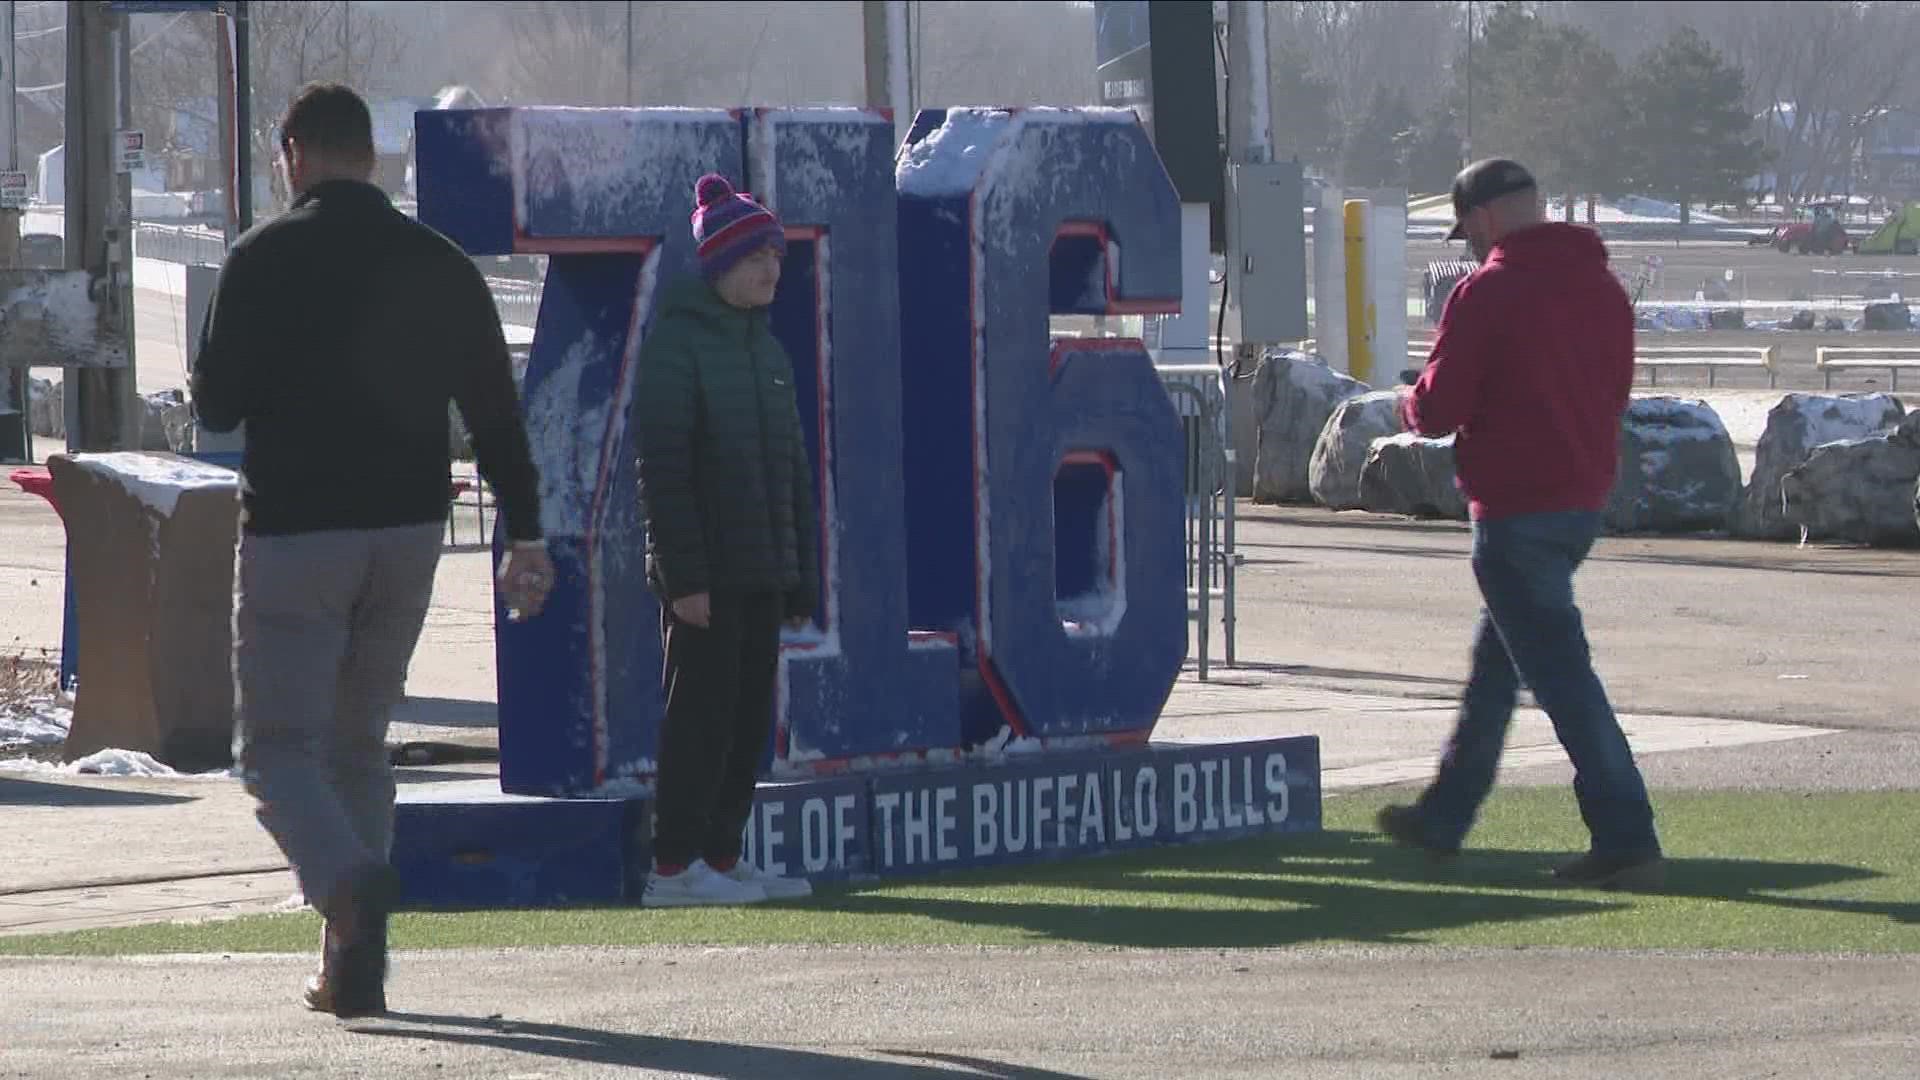 Sunday's game was a little more than some Bills fans bargained for...